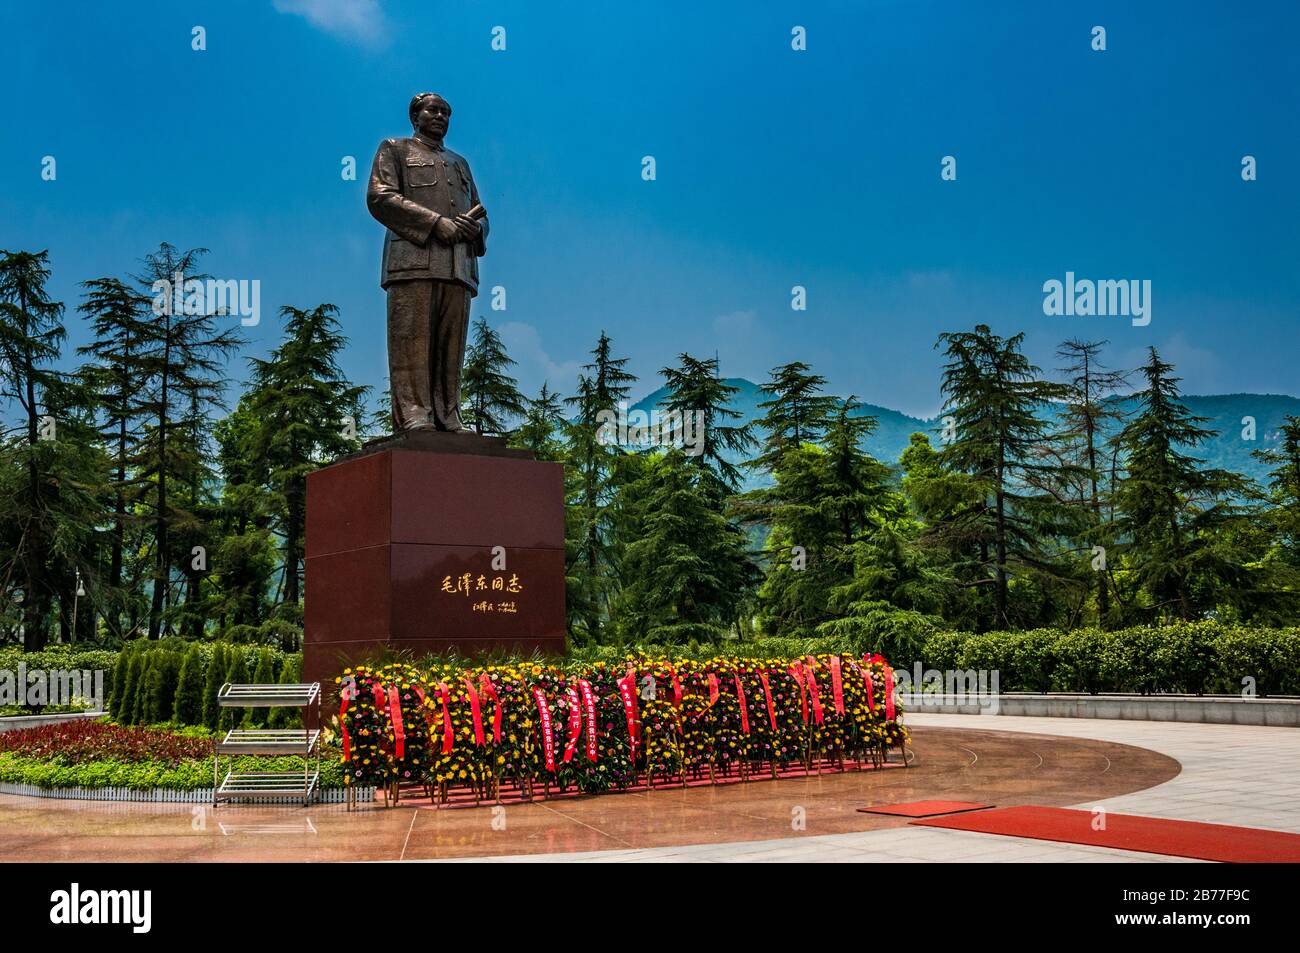 Six metre high bronze Mao Zedong statue in his birthplace of Shaoshan close to the city of Changsha. Stock Photo